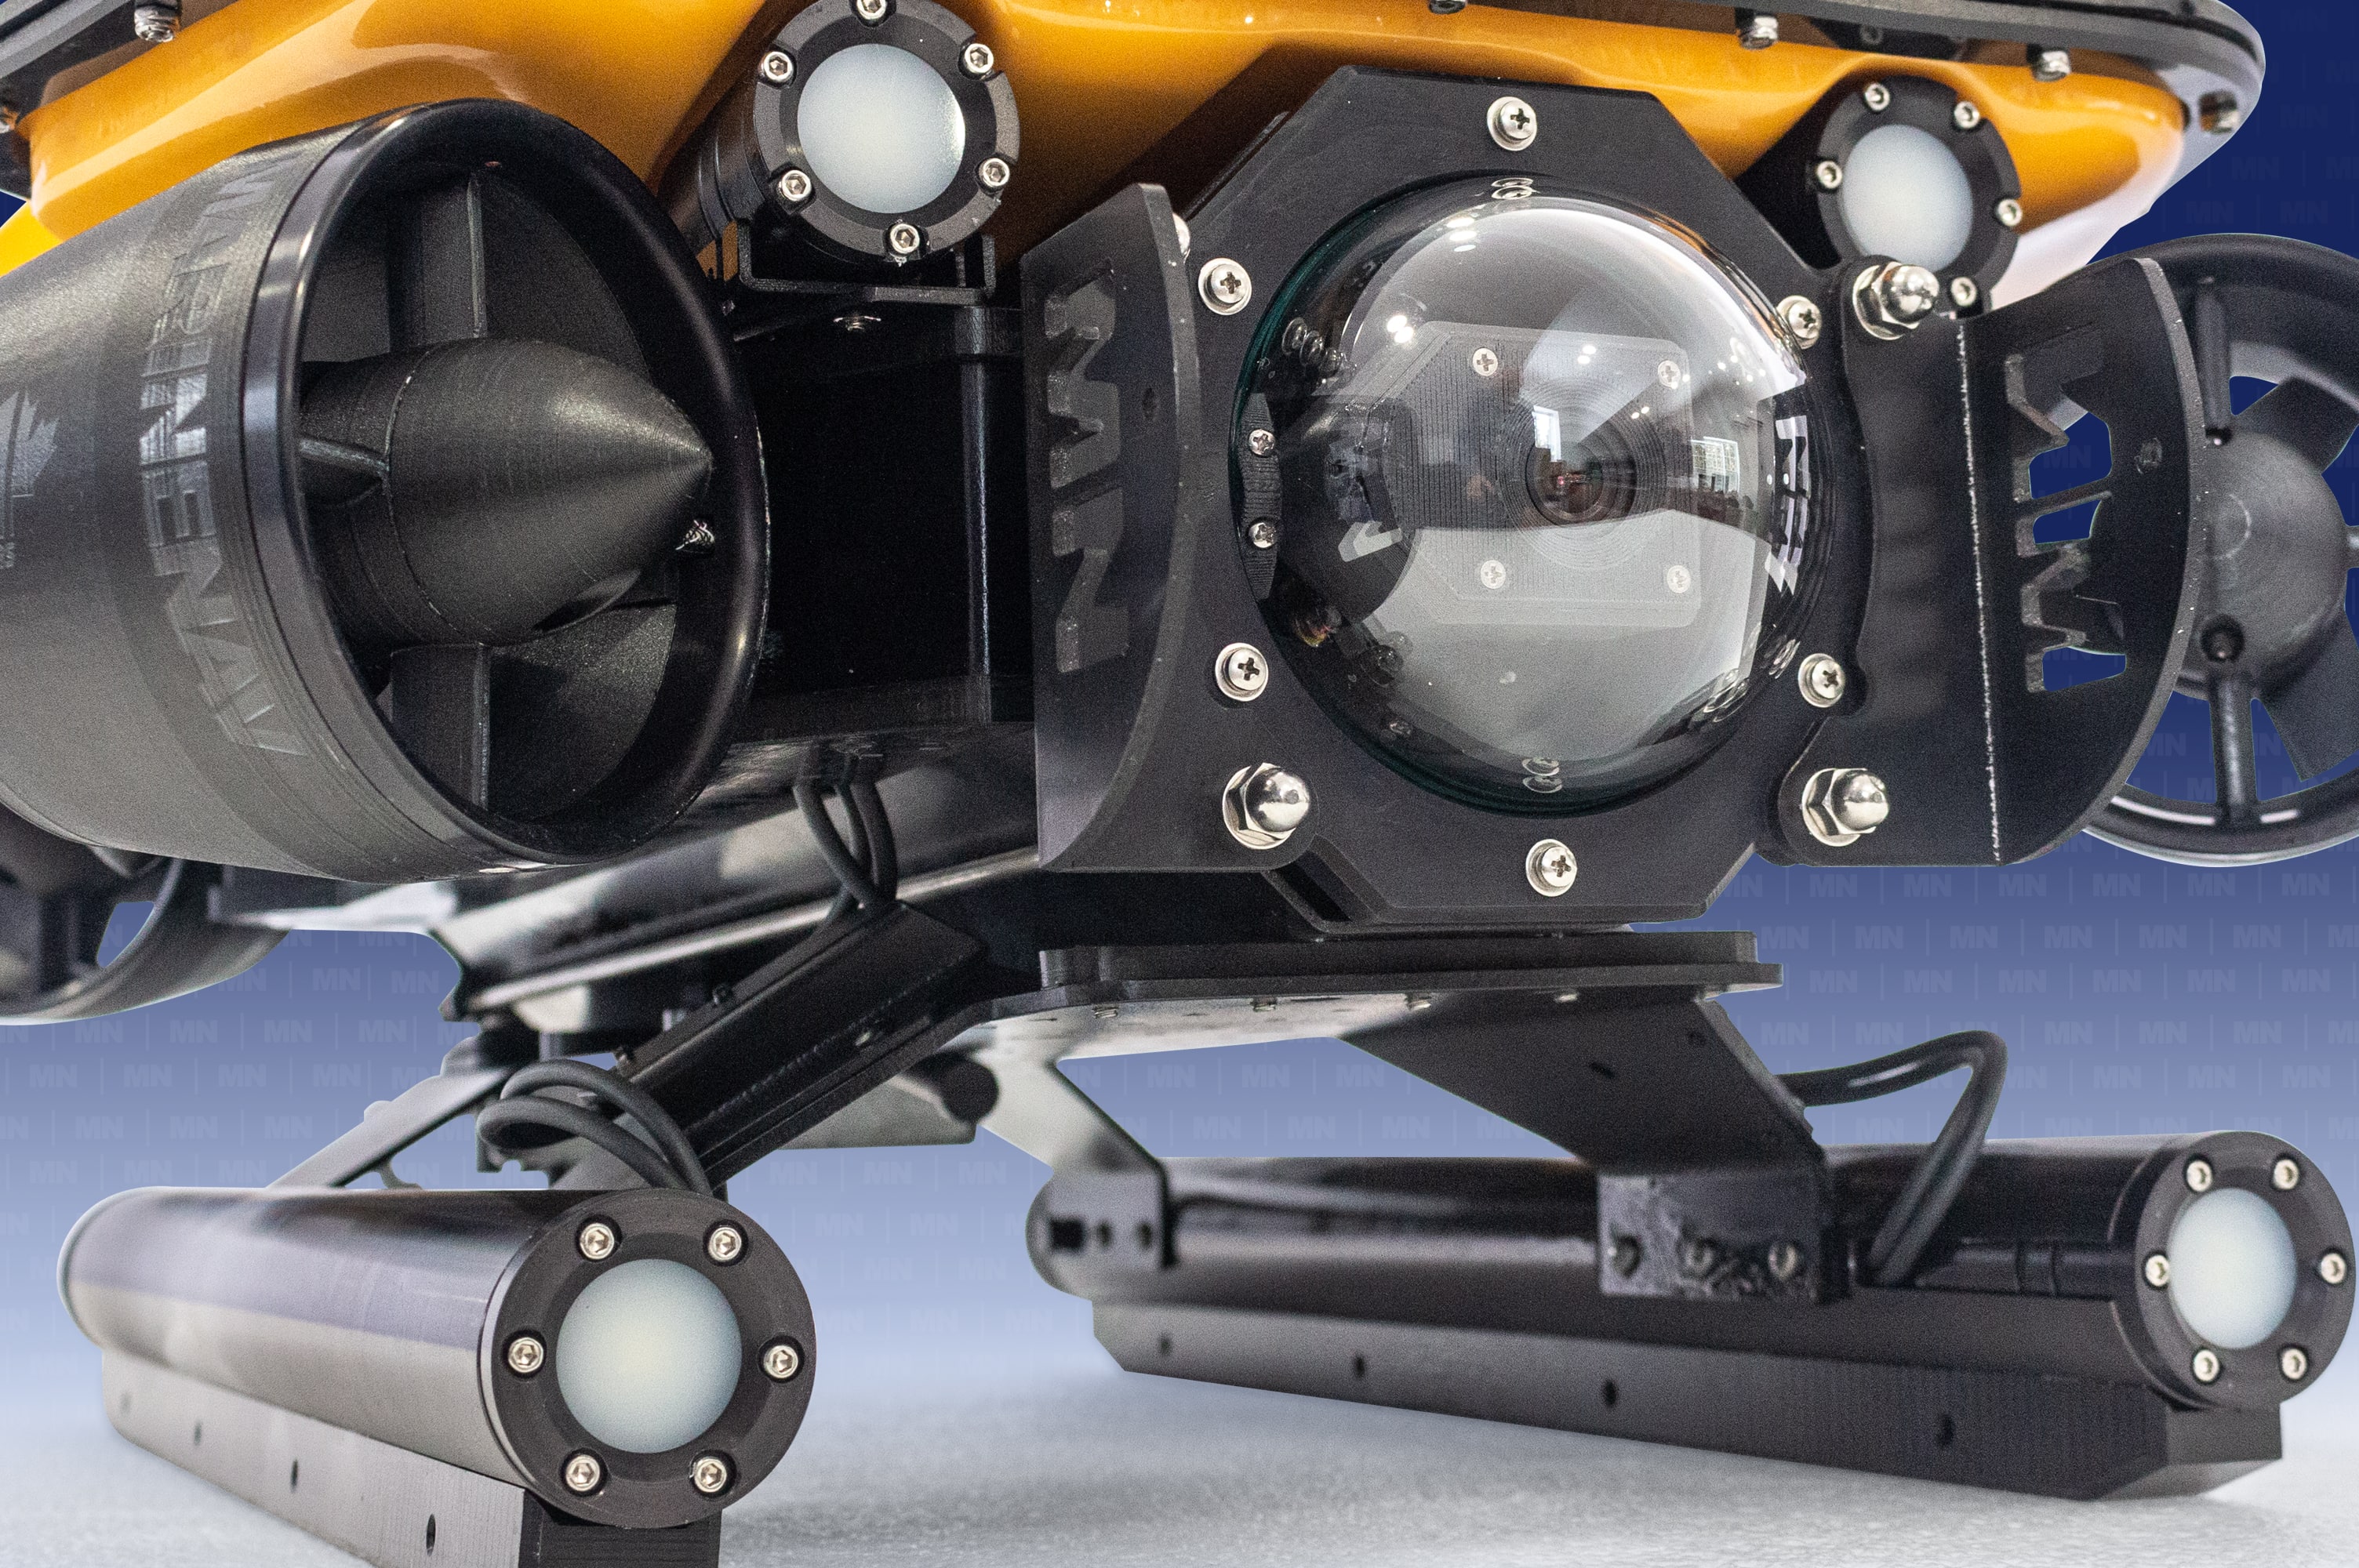 ROV metal work is protected by an anodized finish